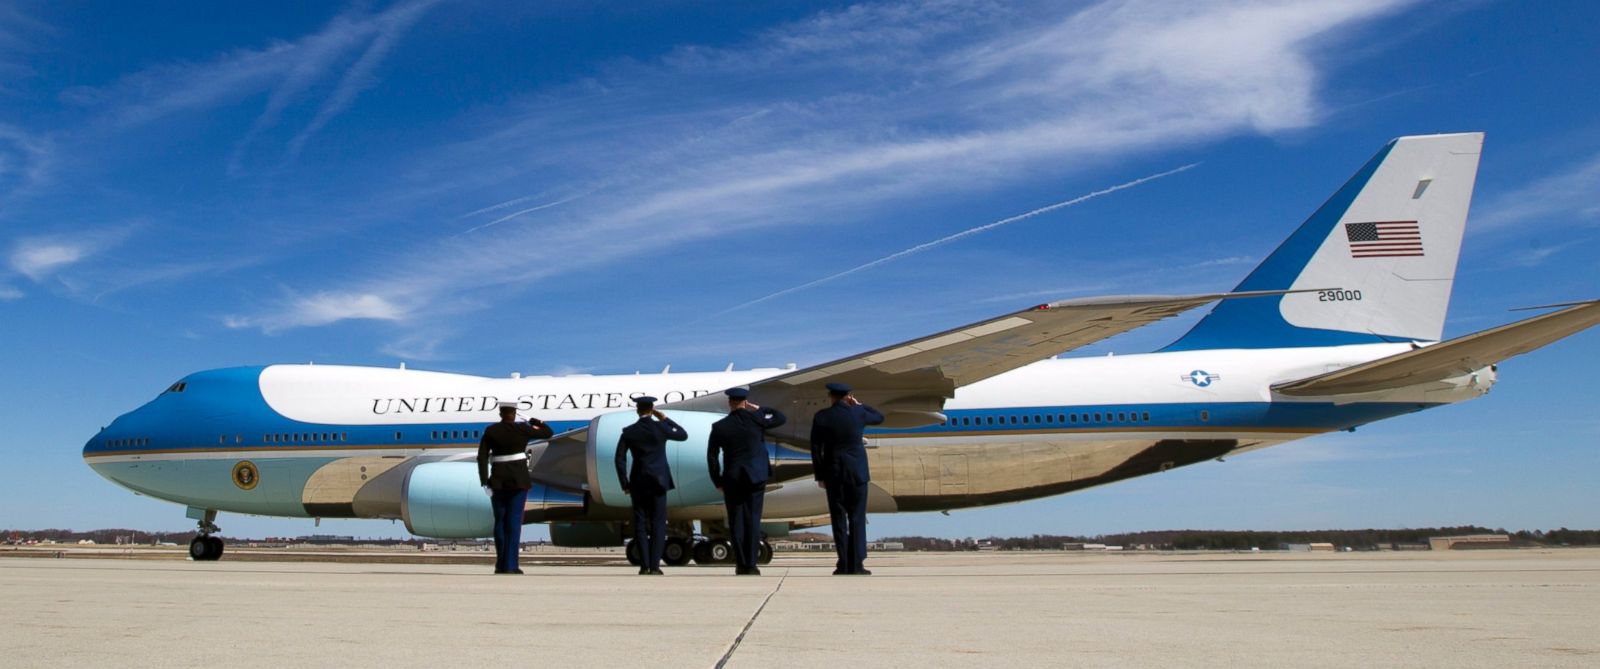 Amazing Air Force One Pictures & Backgrounds